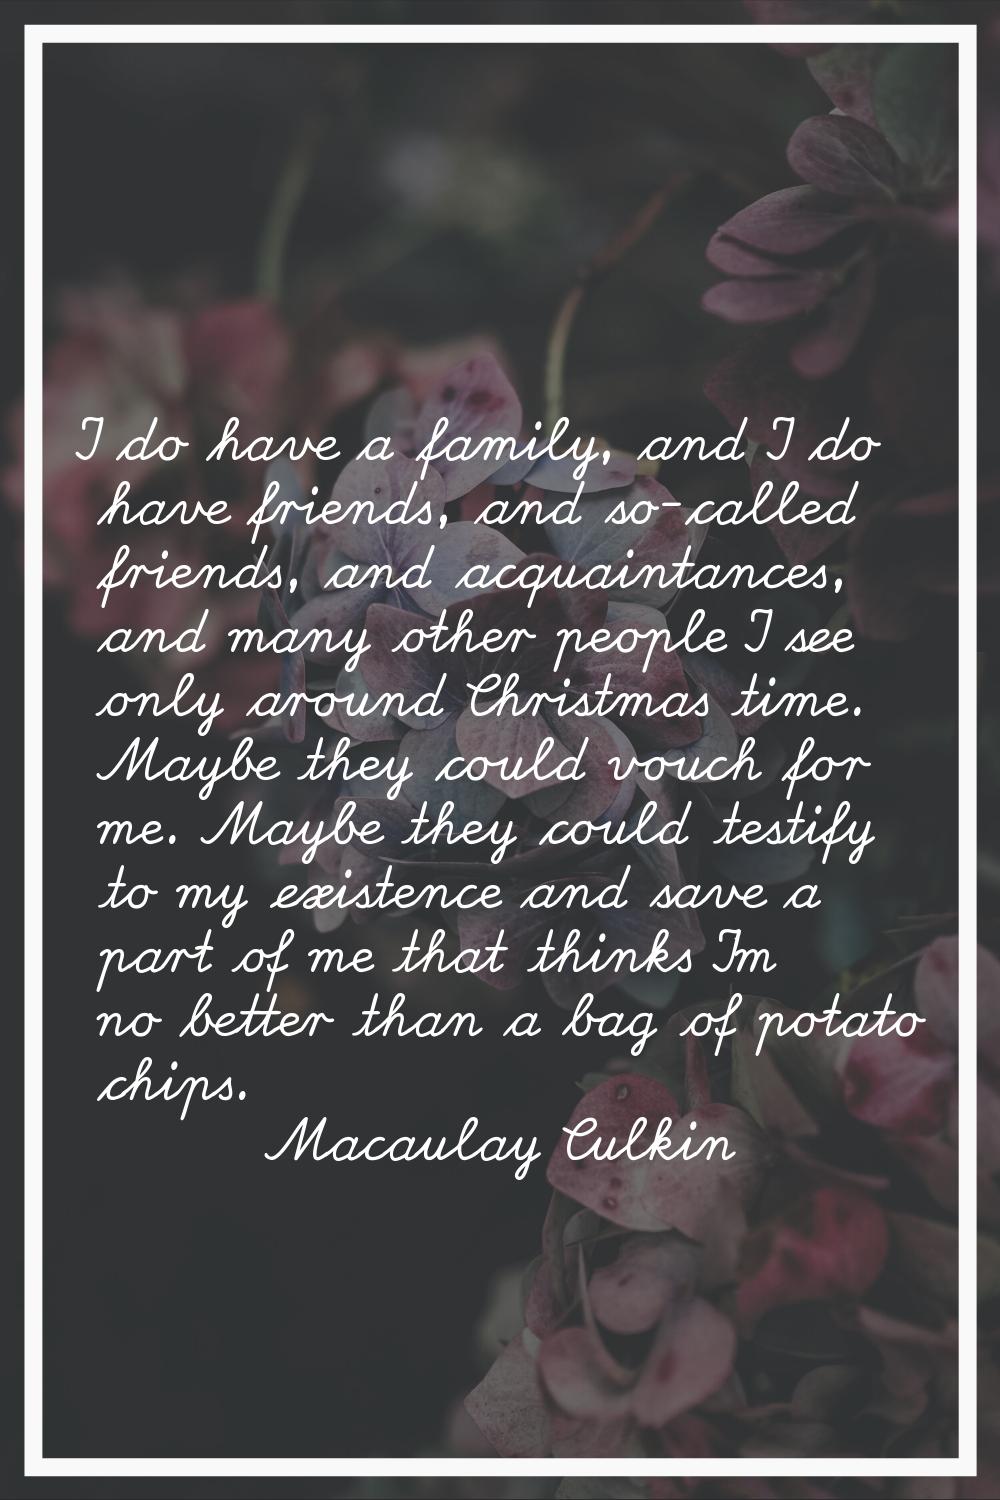 I do have a family, and I do have friends, and so-called friends, and acquaintances, and many other